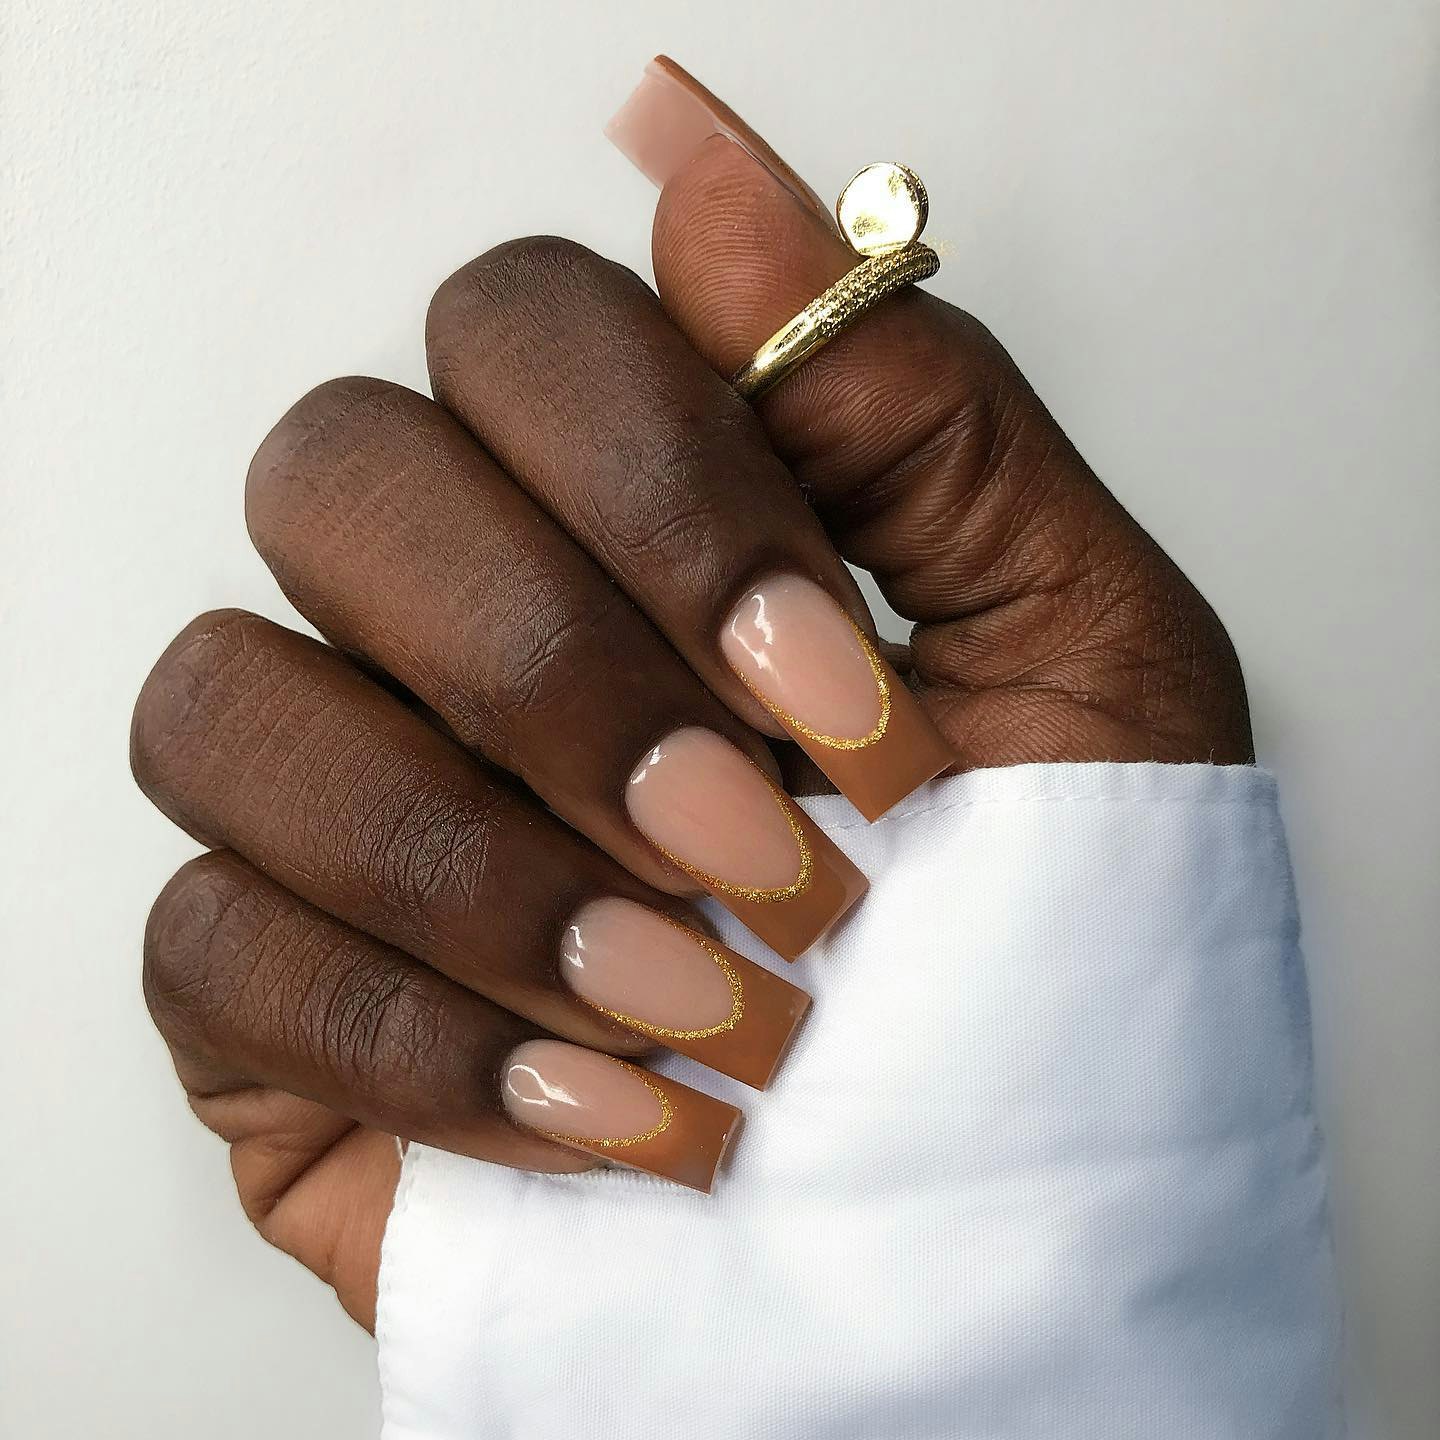 Invisible French Manicures Are the Dainty Twist to This Classic Trend